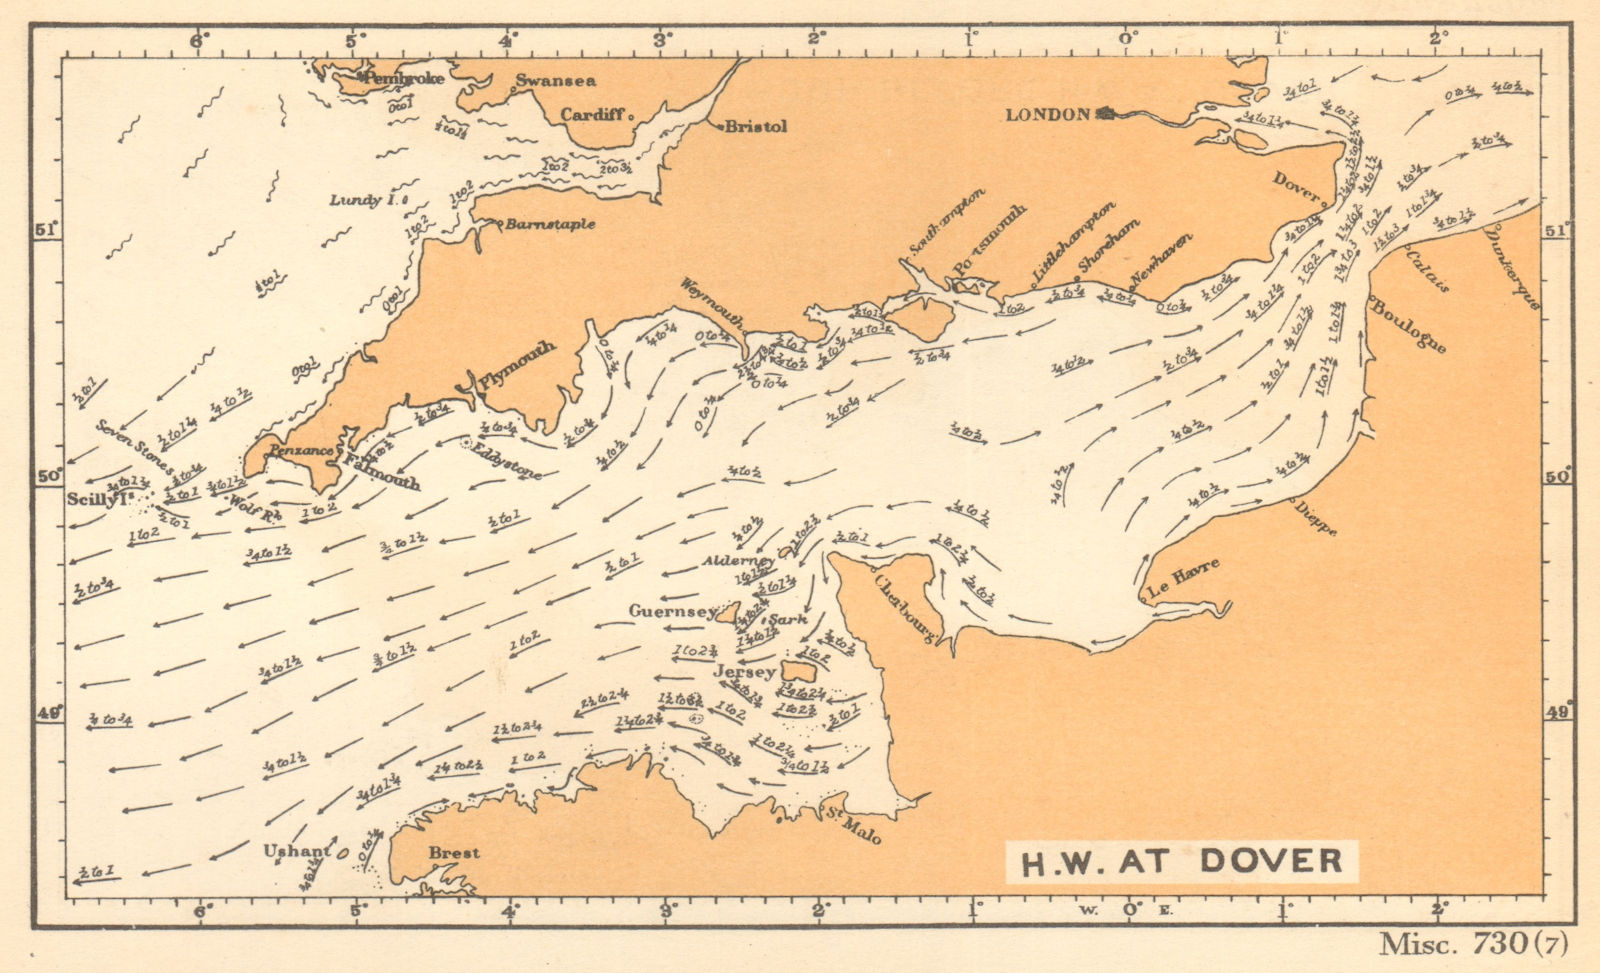 English Channel currents high water at Dover. ADMIRALTY 1943 old vintage map